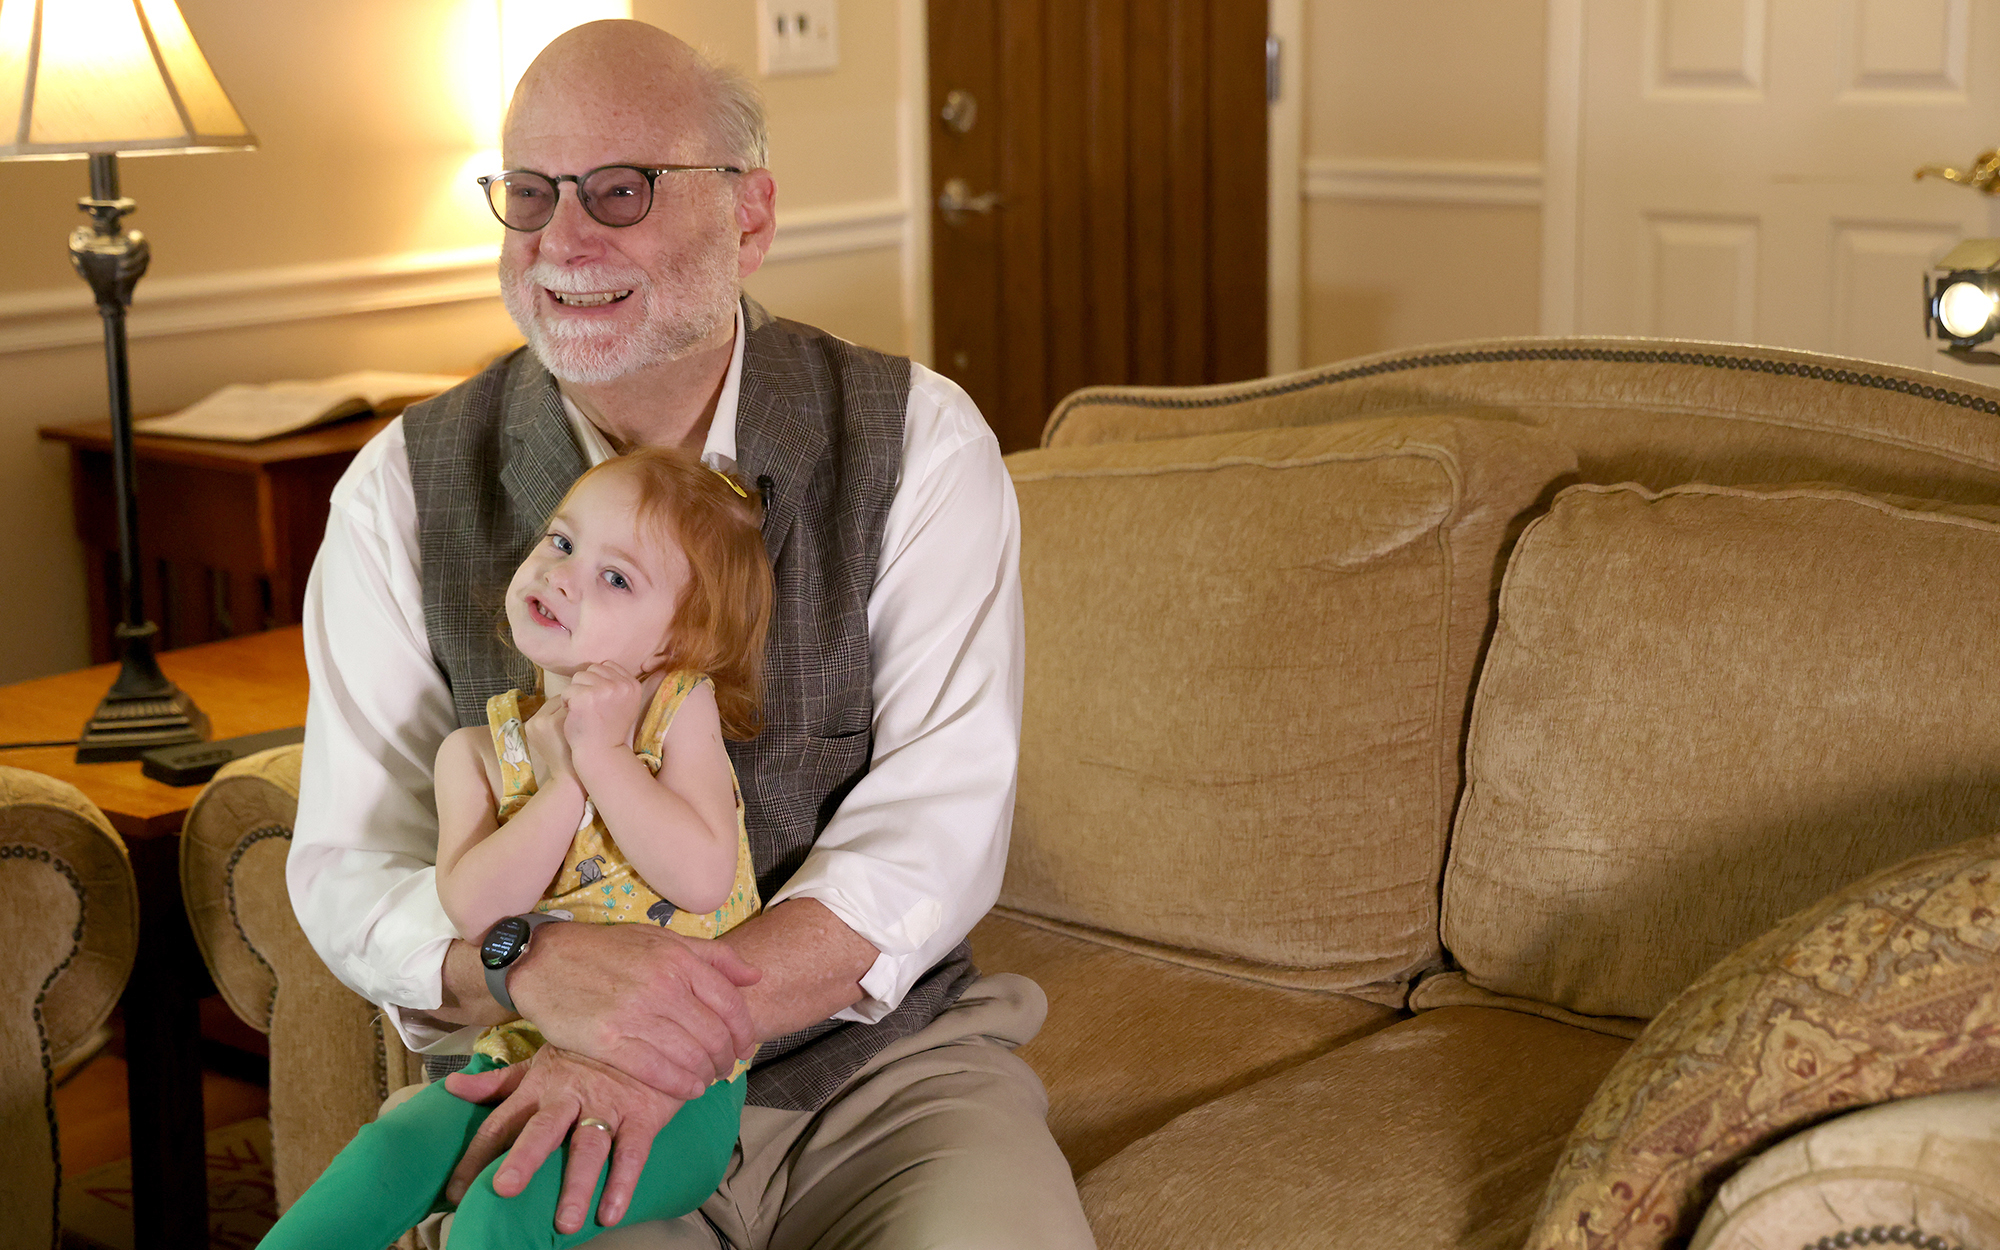 Rev. Bill Levering holds his daughter, Valerie, at his home in Schenectady, N.Y., on June 17, 2023. Valerie was conceived via in vitro fertilization, which, along with abortion and other health care services, is prohibited at Catholic-run hospitals. (Photo by Morgan Casey/News21)